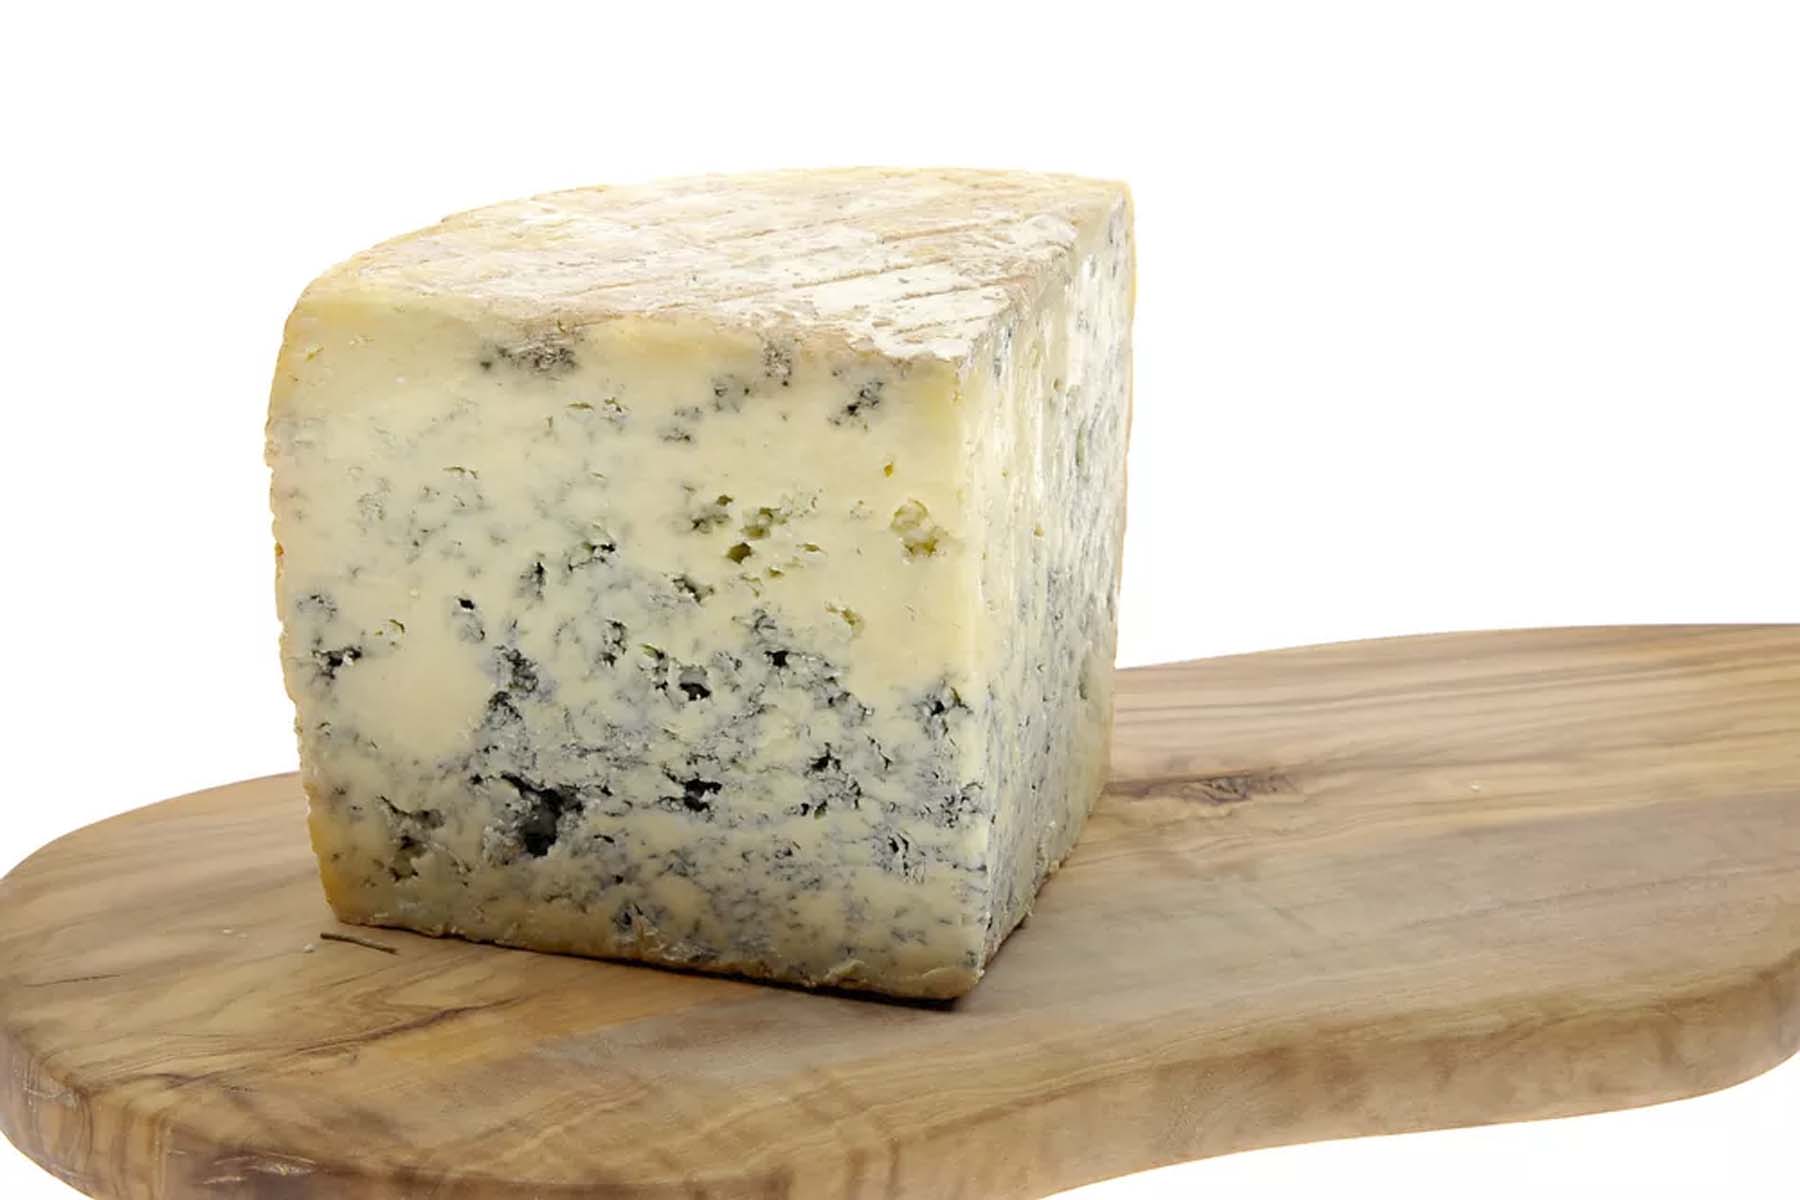 Cabrales: The Prince Cheese of Spain